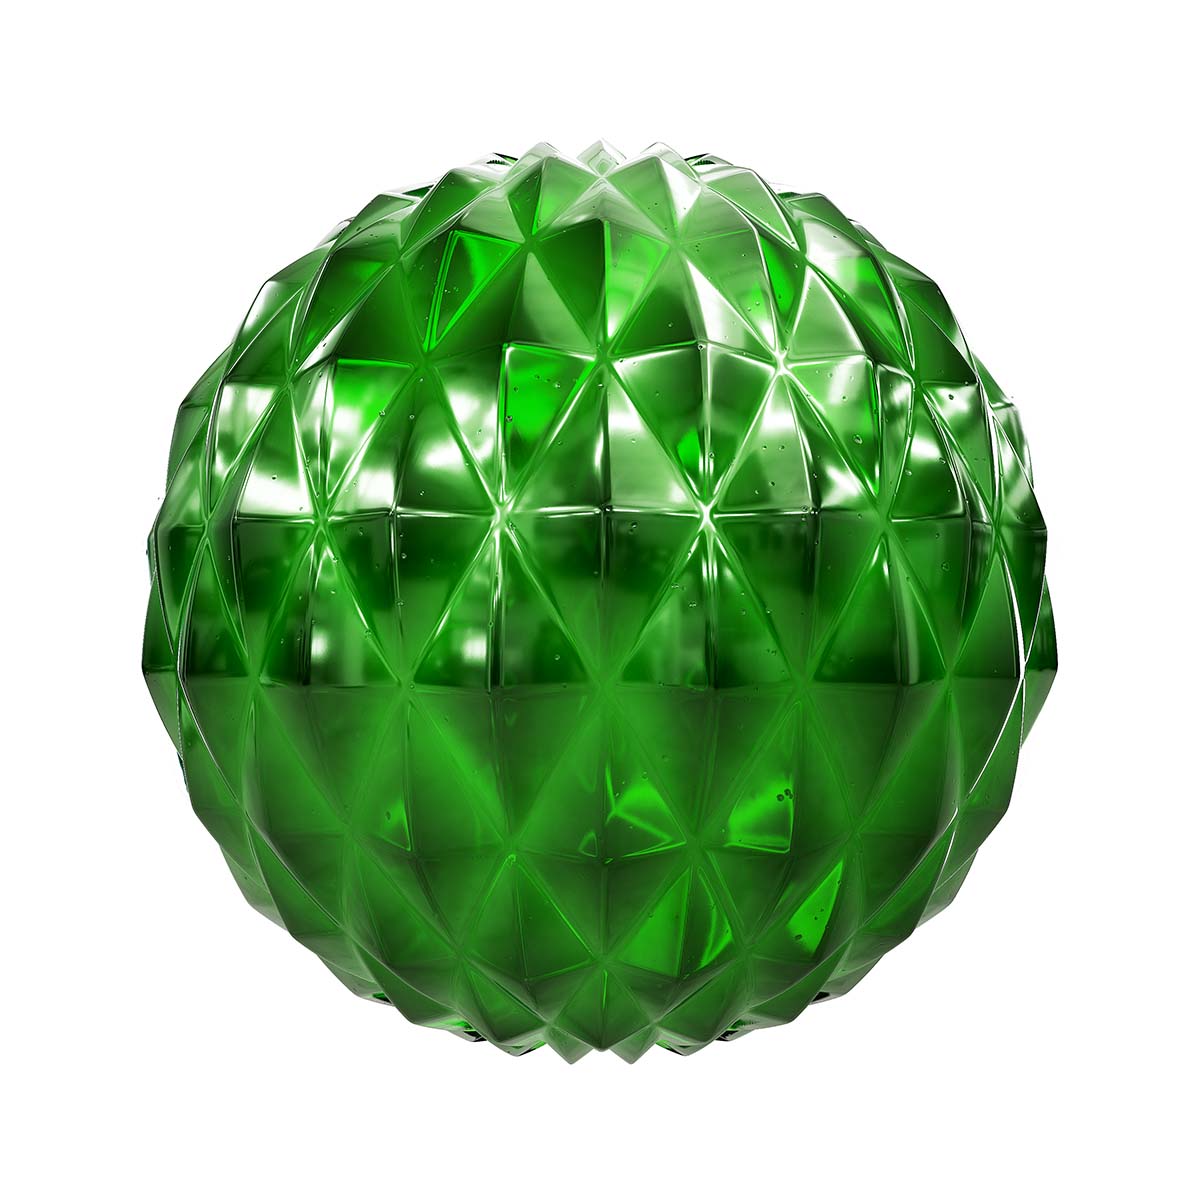 Green Patterned Glass PBR Texture